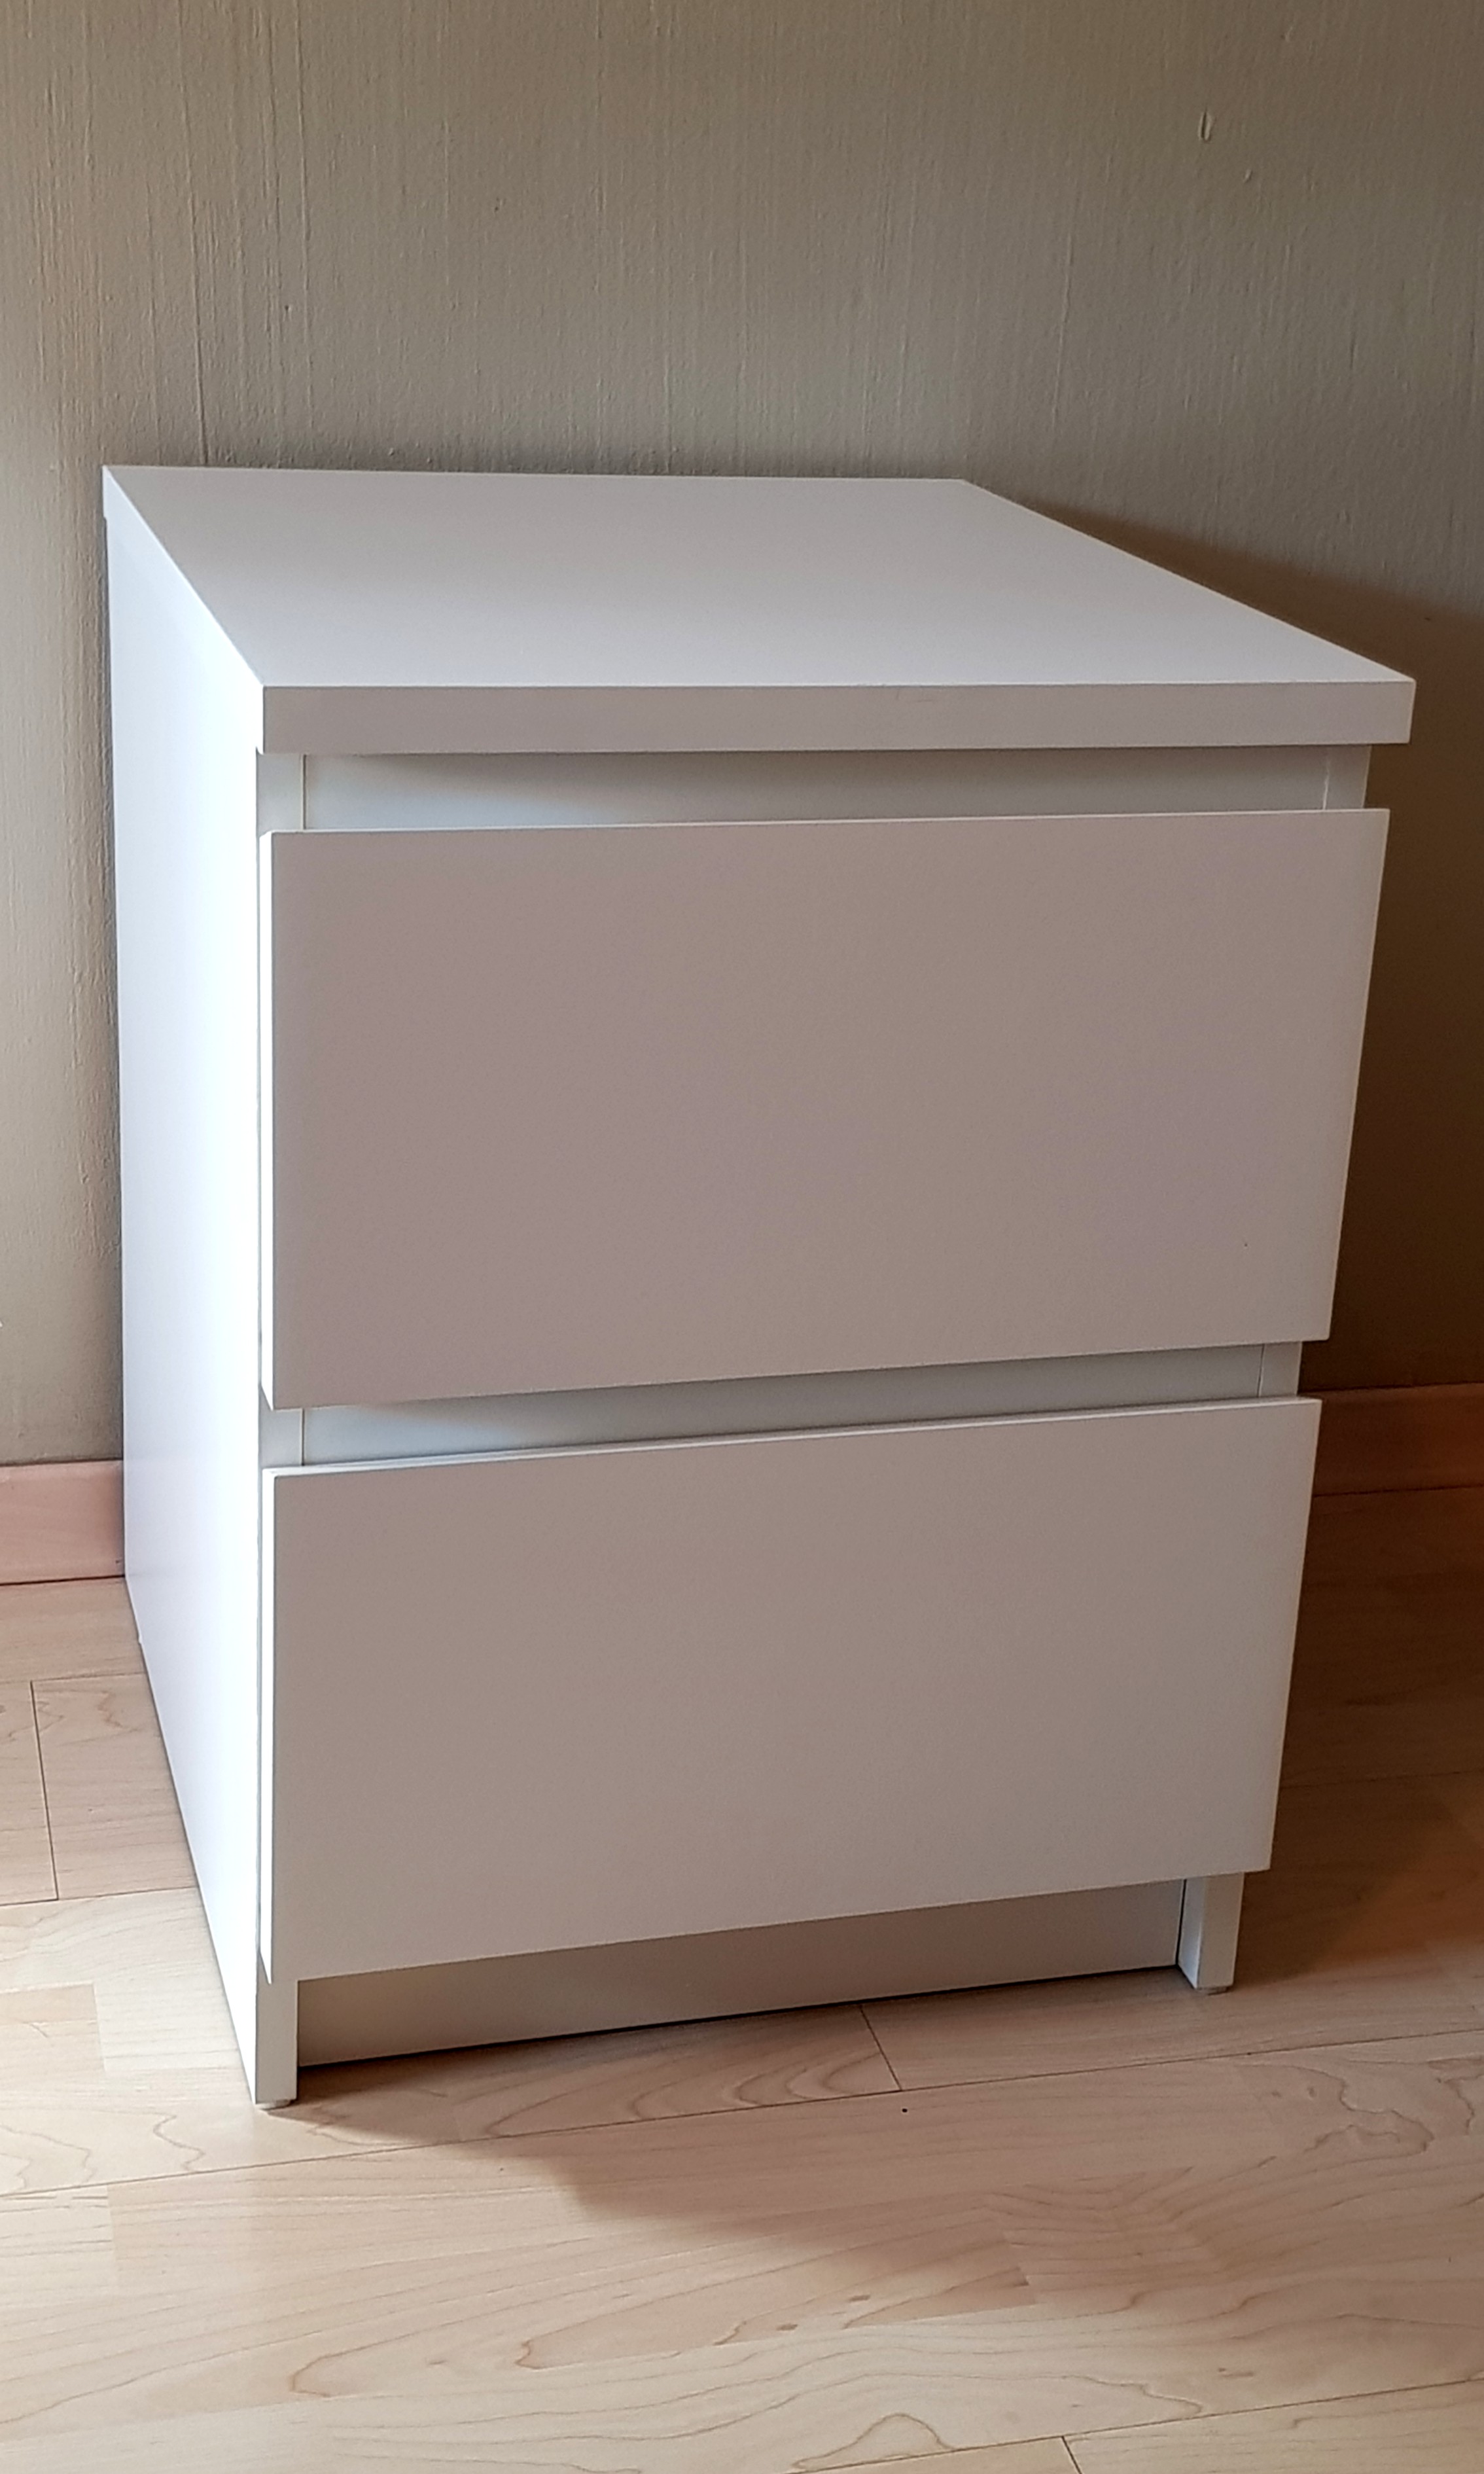 Ikea Malm Chest Of 2 Drawers Furniture Shelves Drawers On